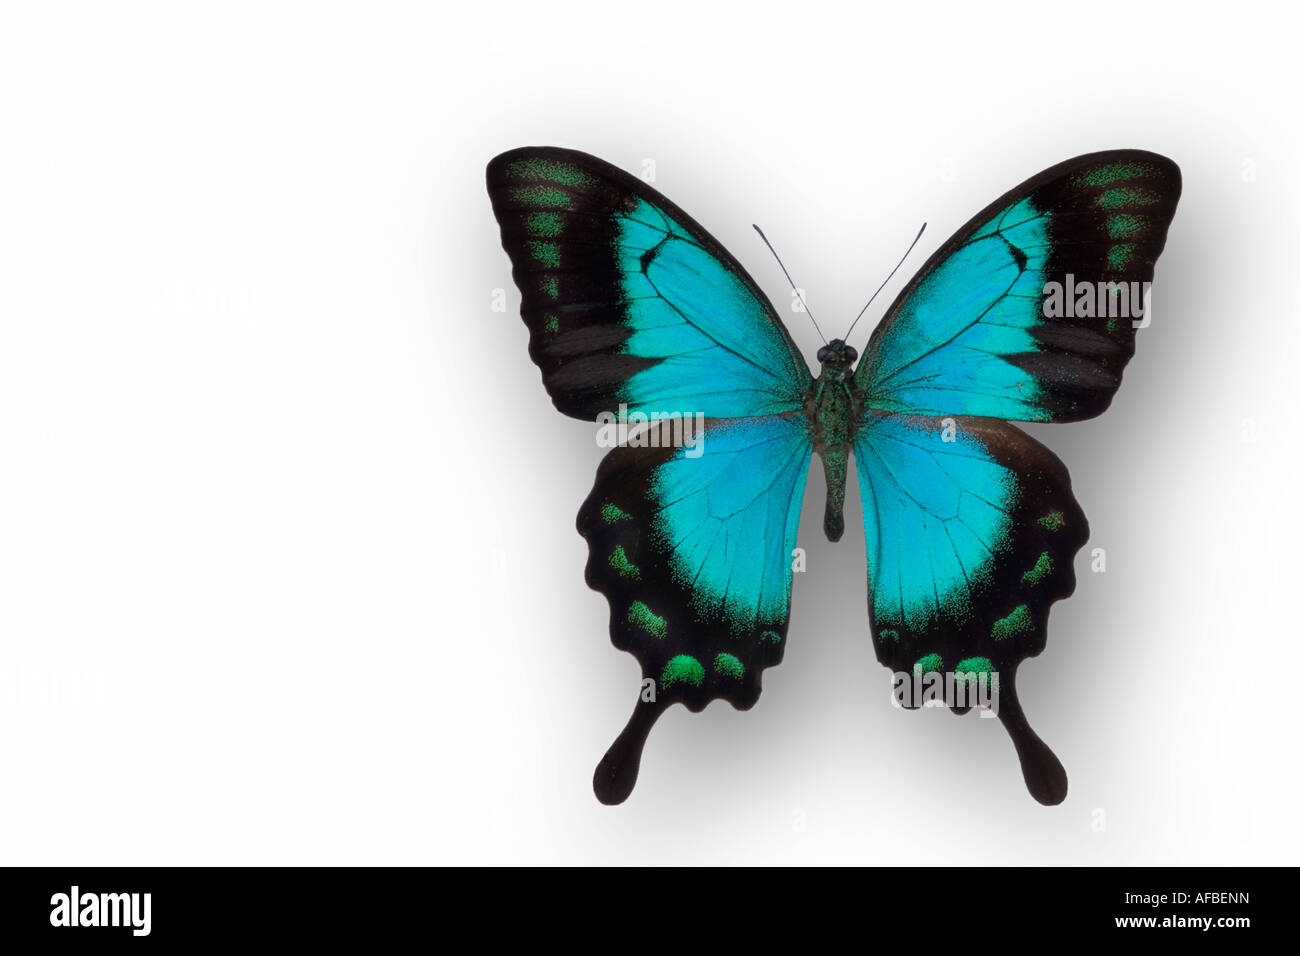 Male Gloss Swallowtail butterfly from Indonesia Stock Photo